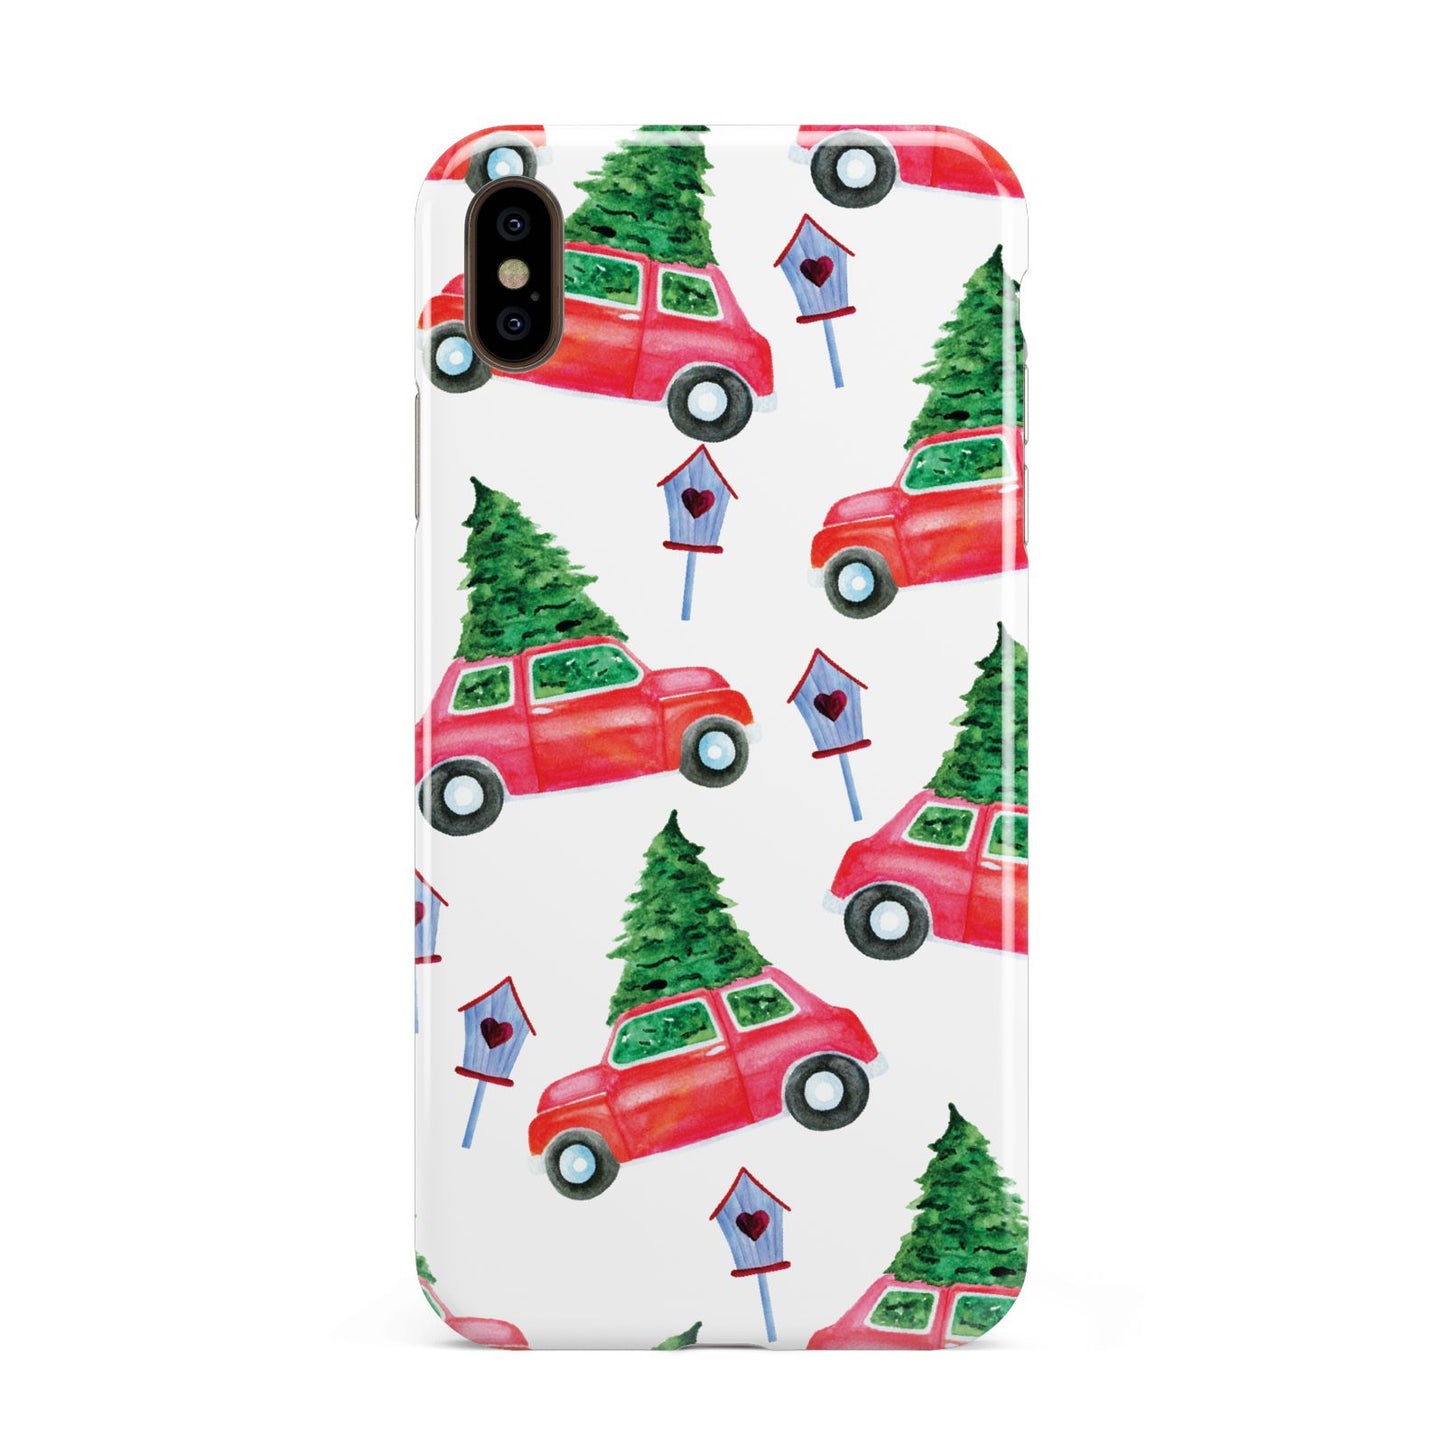 Driving home for Christmas Apple iPhone Xs Max 3D Tough Case